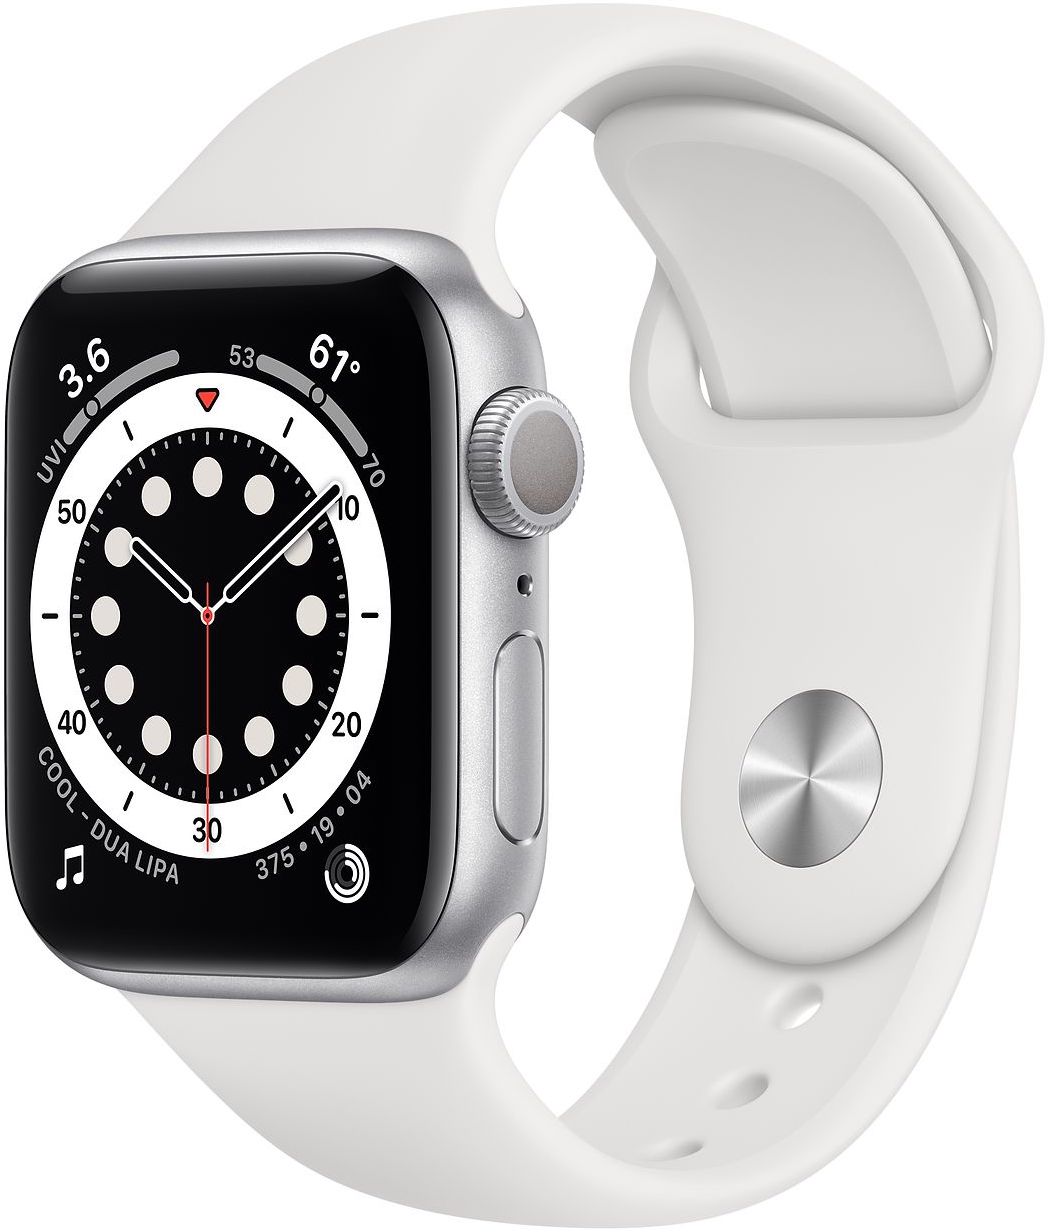 Apple Watch Series 6 Silver Aluminum White Sport Band